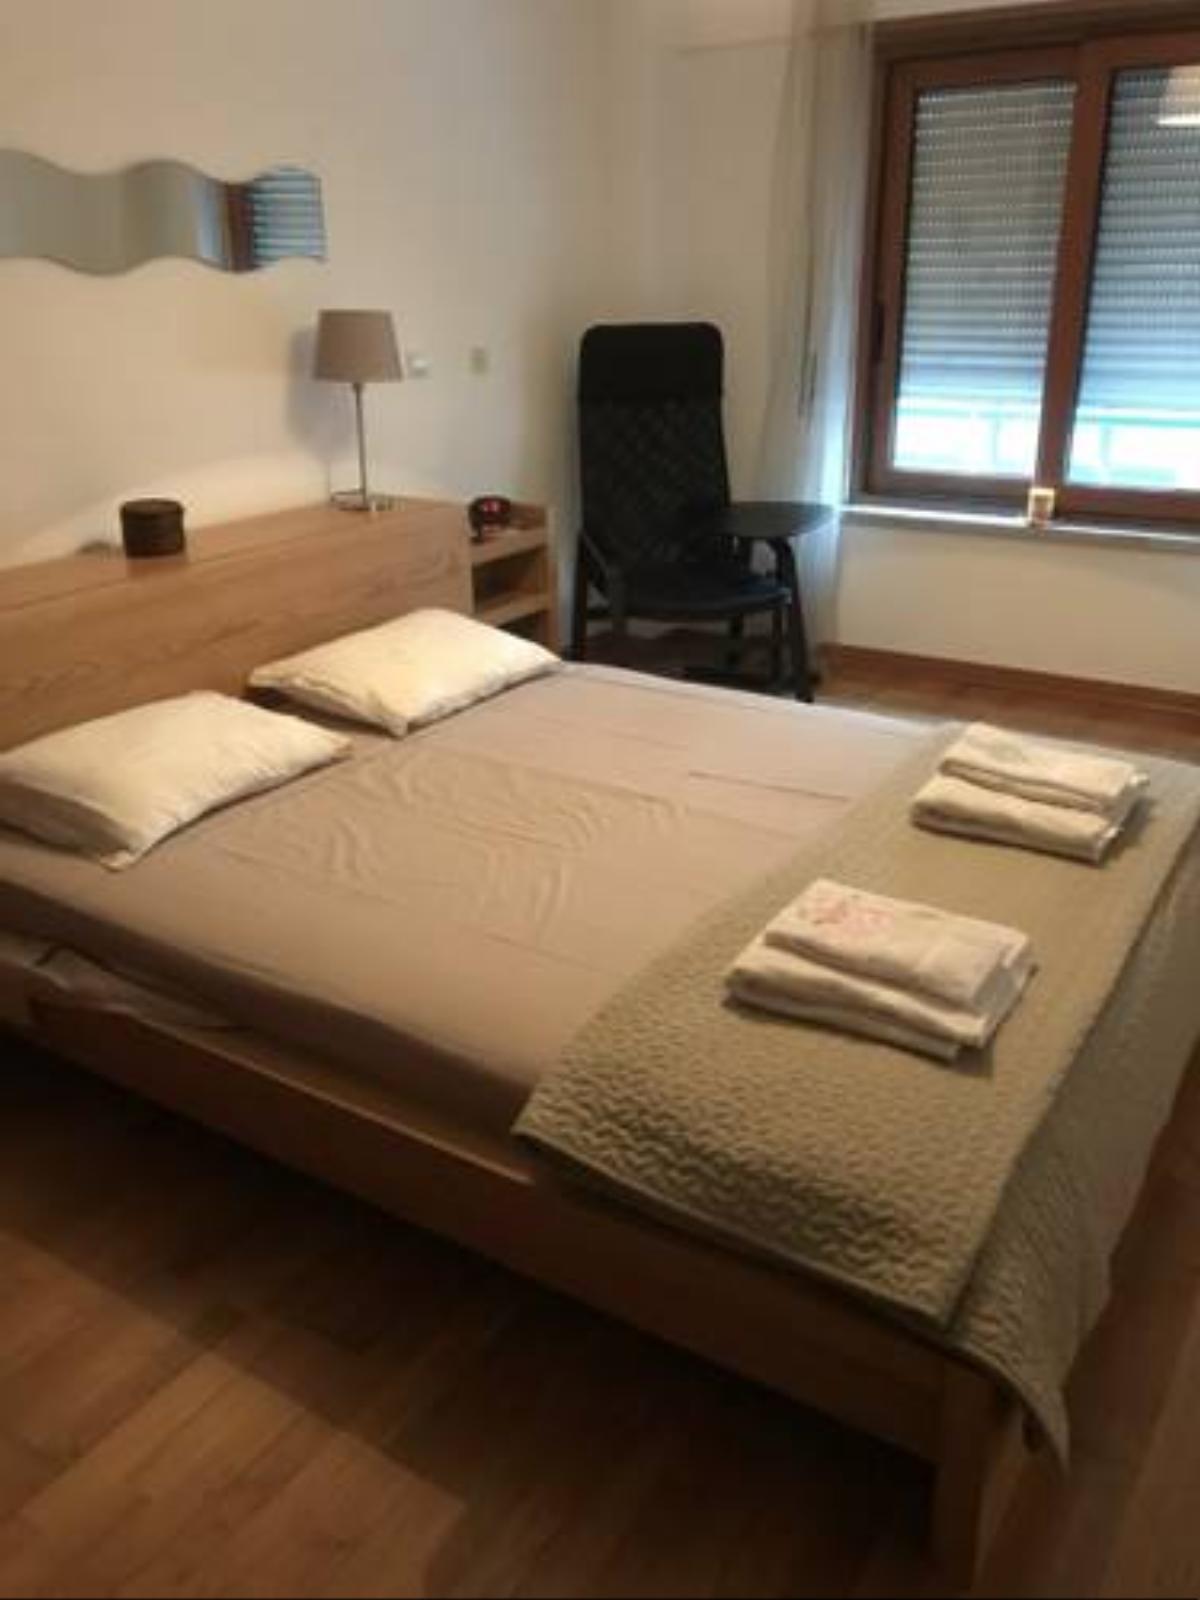 Bed & Breakfast with Private WC, near Lisbon Hotel Carnaxide Portugal